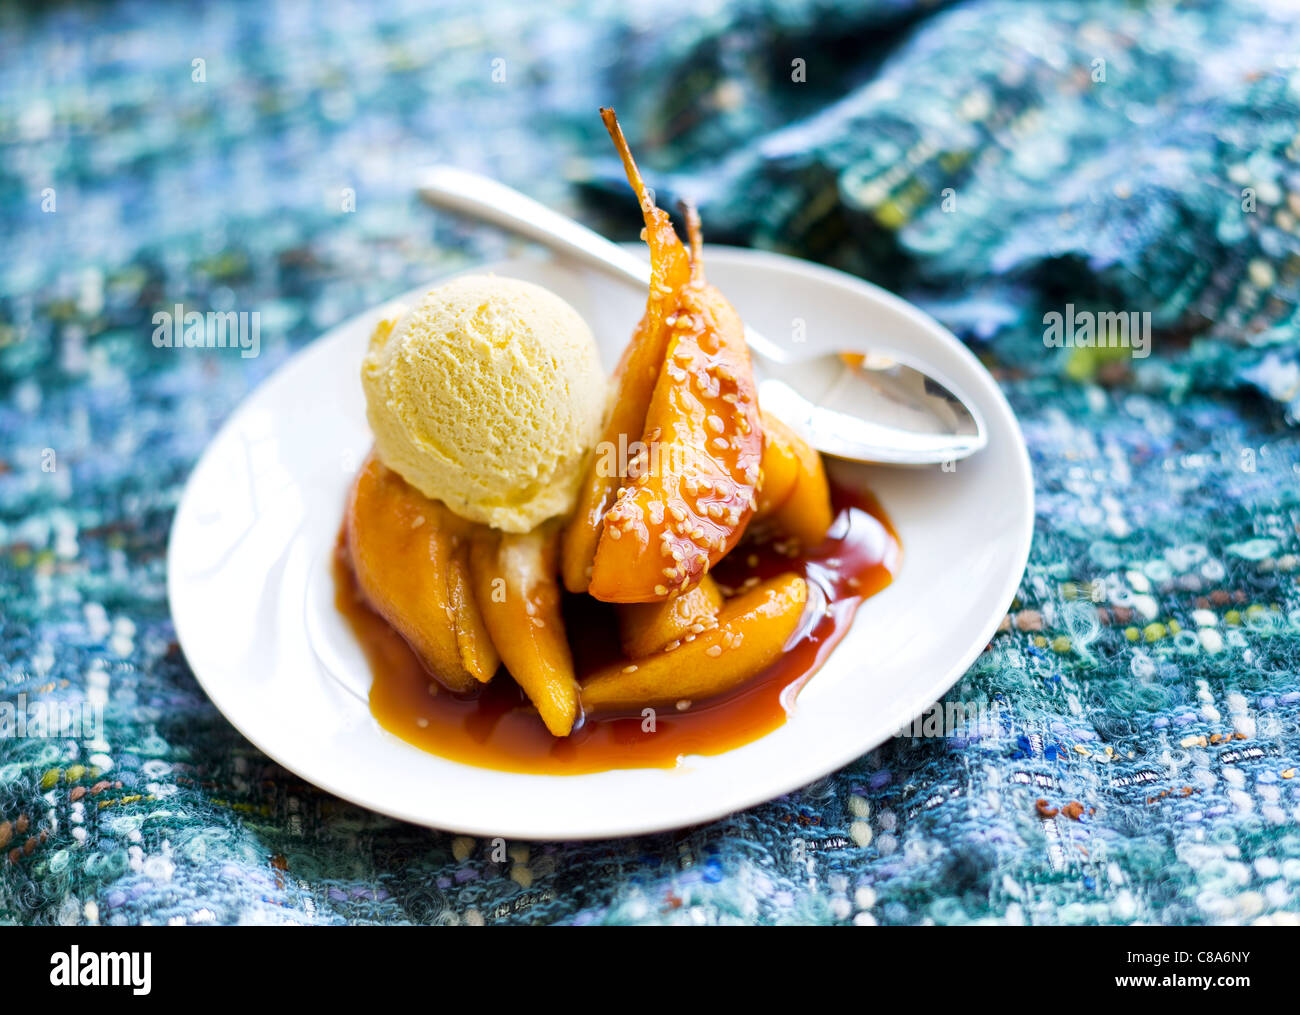 Caramelized pears with a scoop of vanilla ice cream Stock Photo